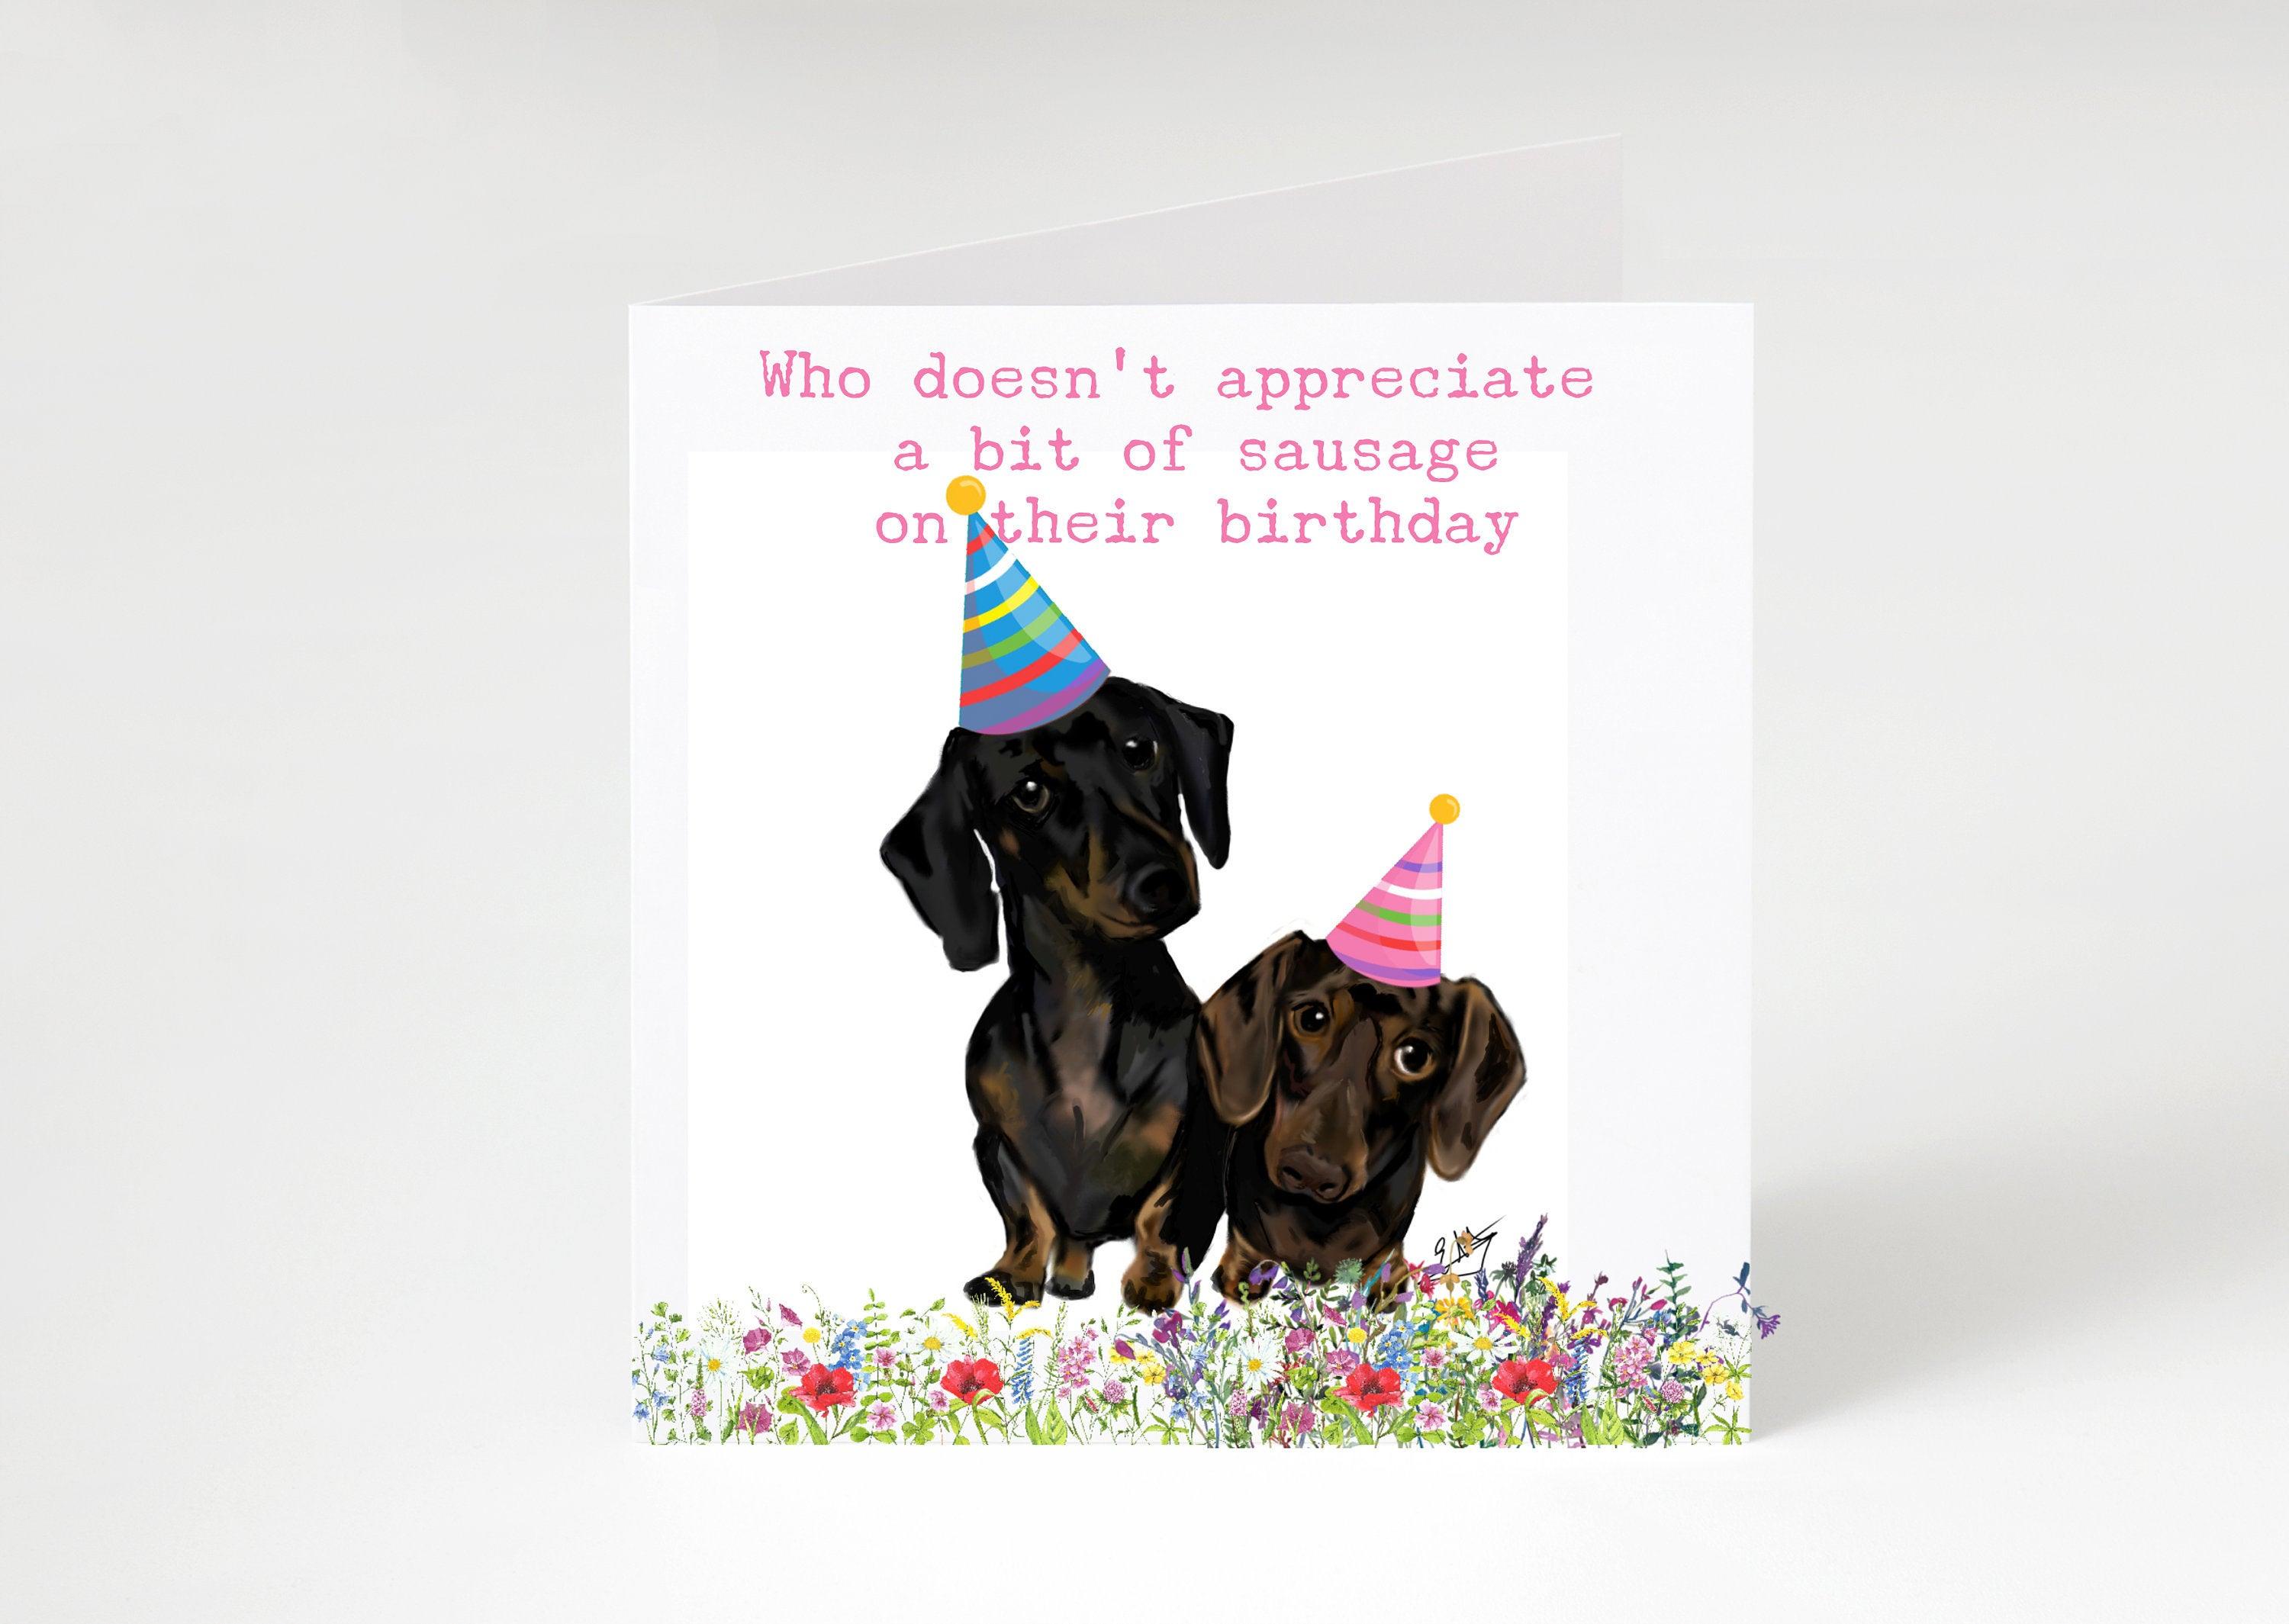 Sausage Dog funny birthday card - Daschund cards-  funny rude cards, Sausage dog humourous greetings cards **FREE UK DELIVERY**